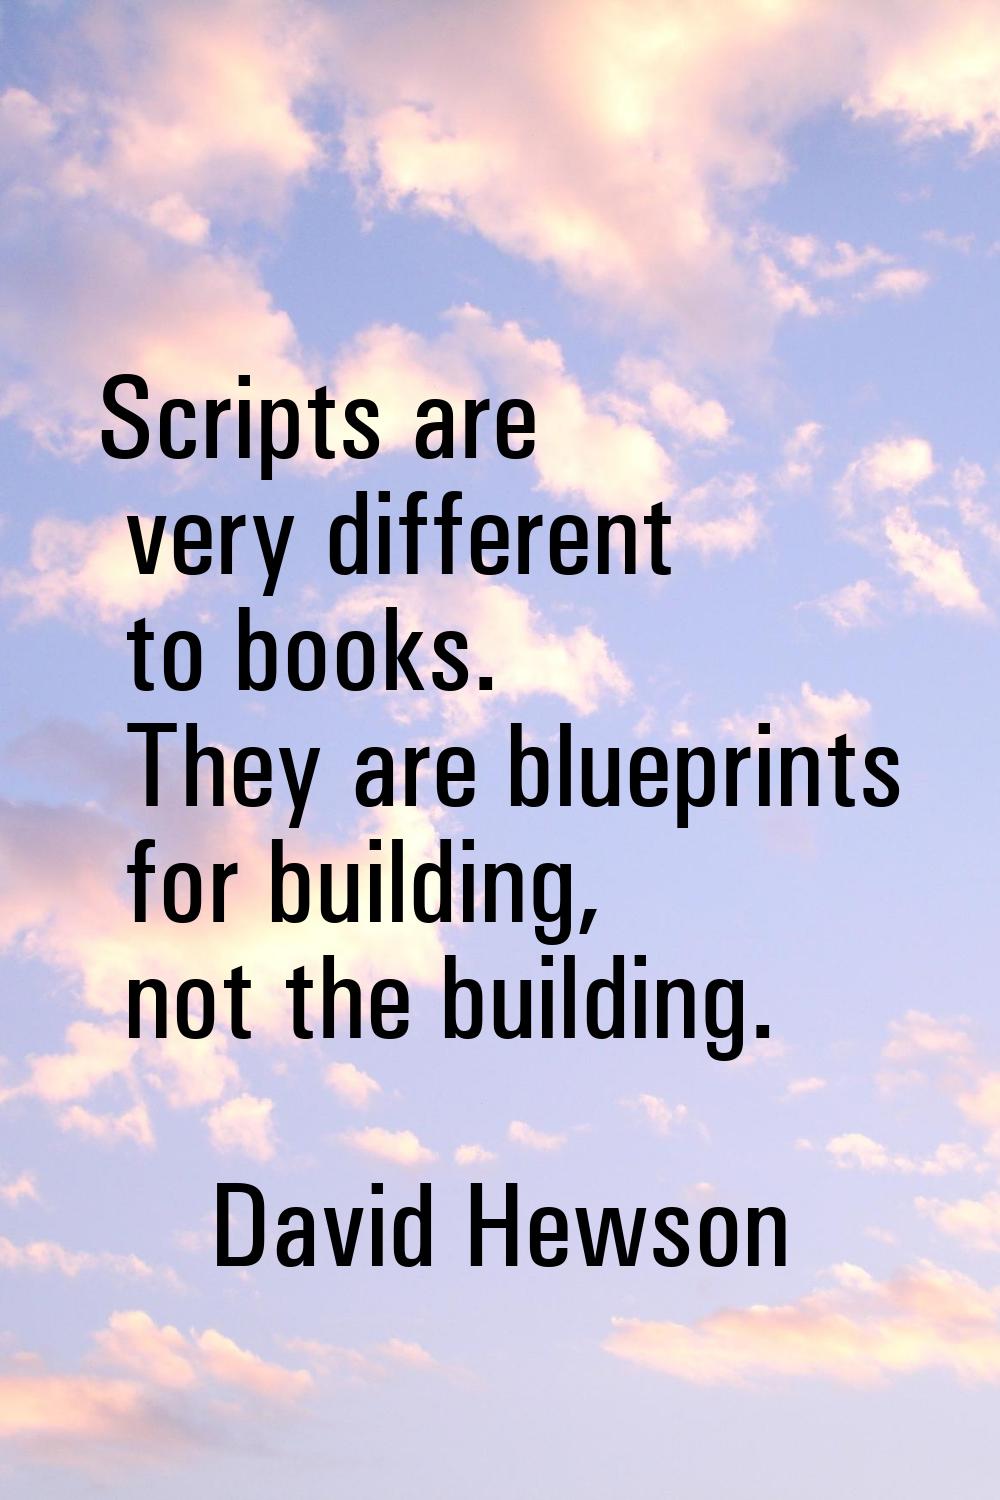 Scripts are very different to books. They are blueprints for building, not the building.